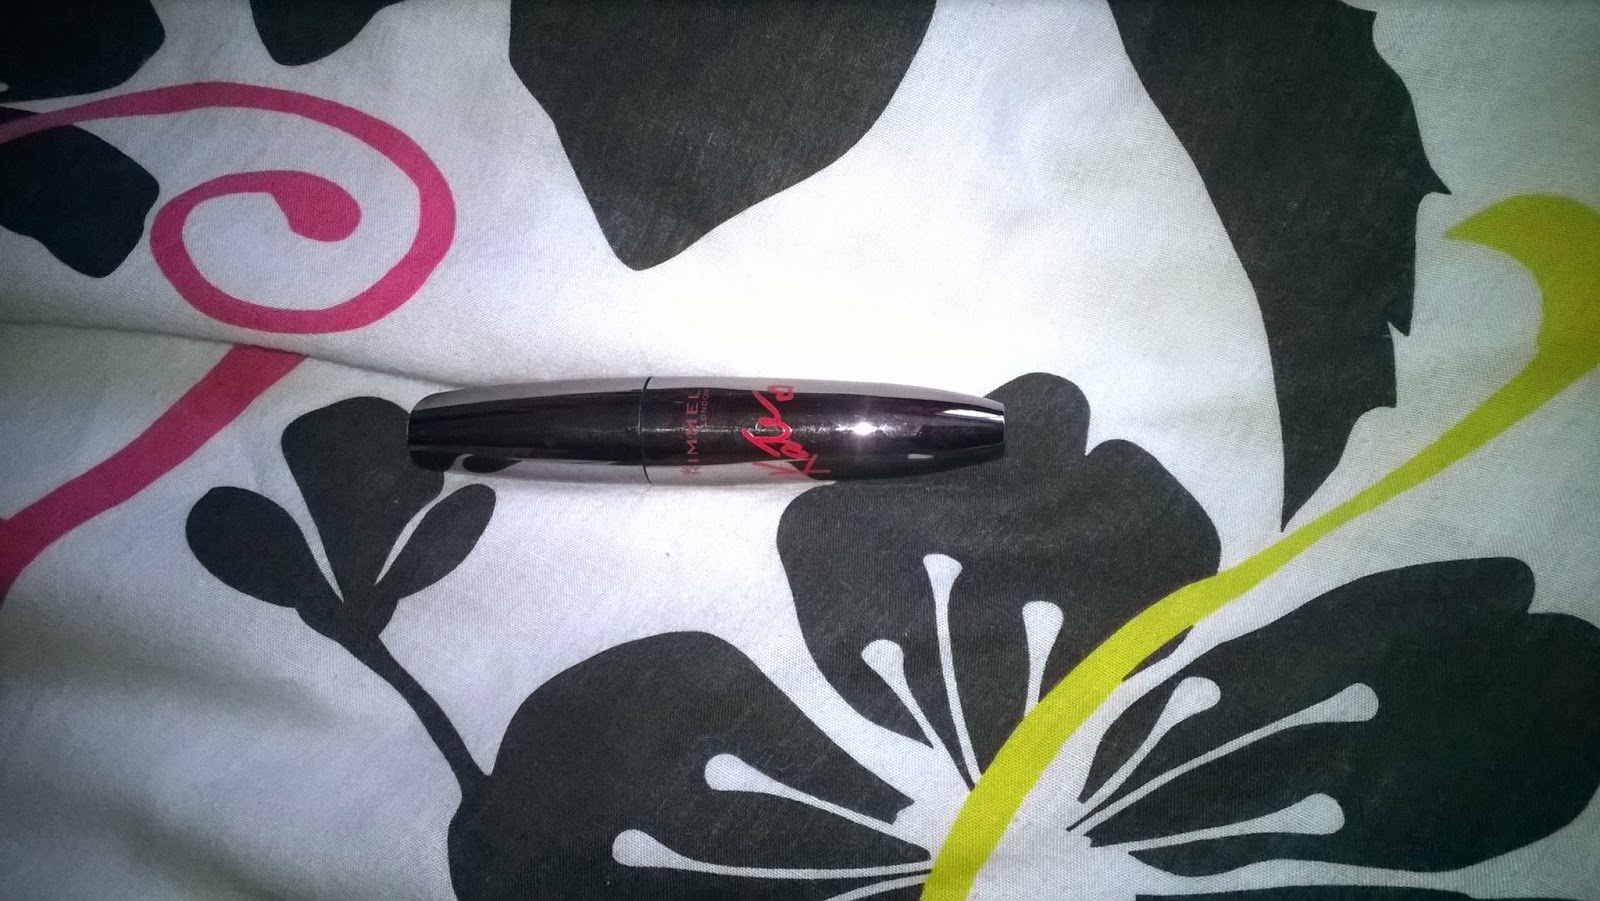 Rimmel mascara turned up thing it was from a beauty survey I did.